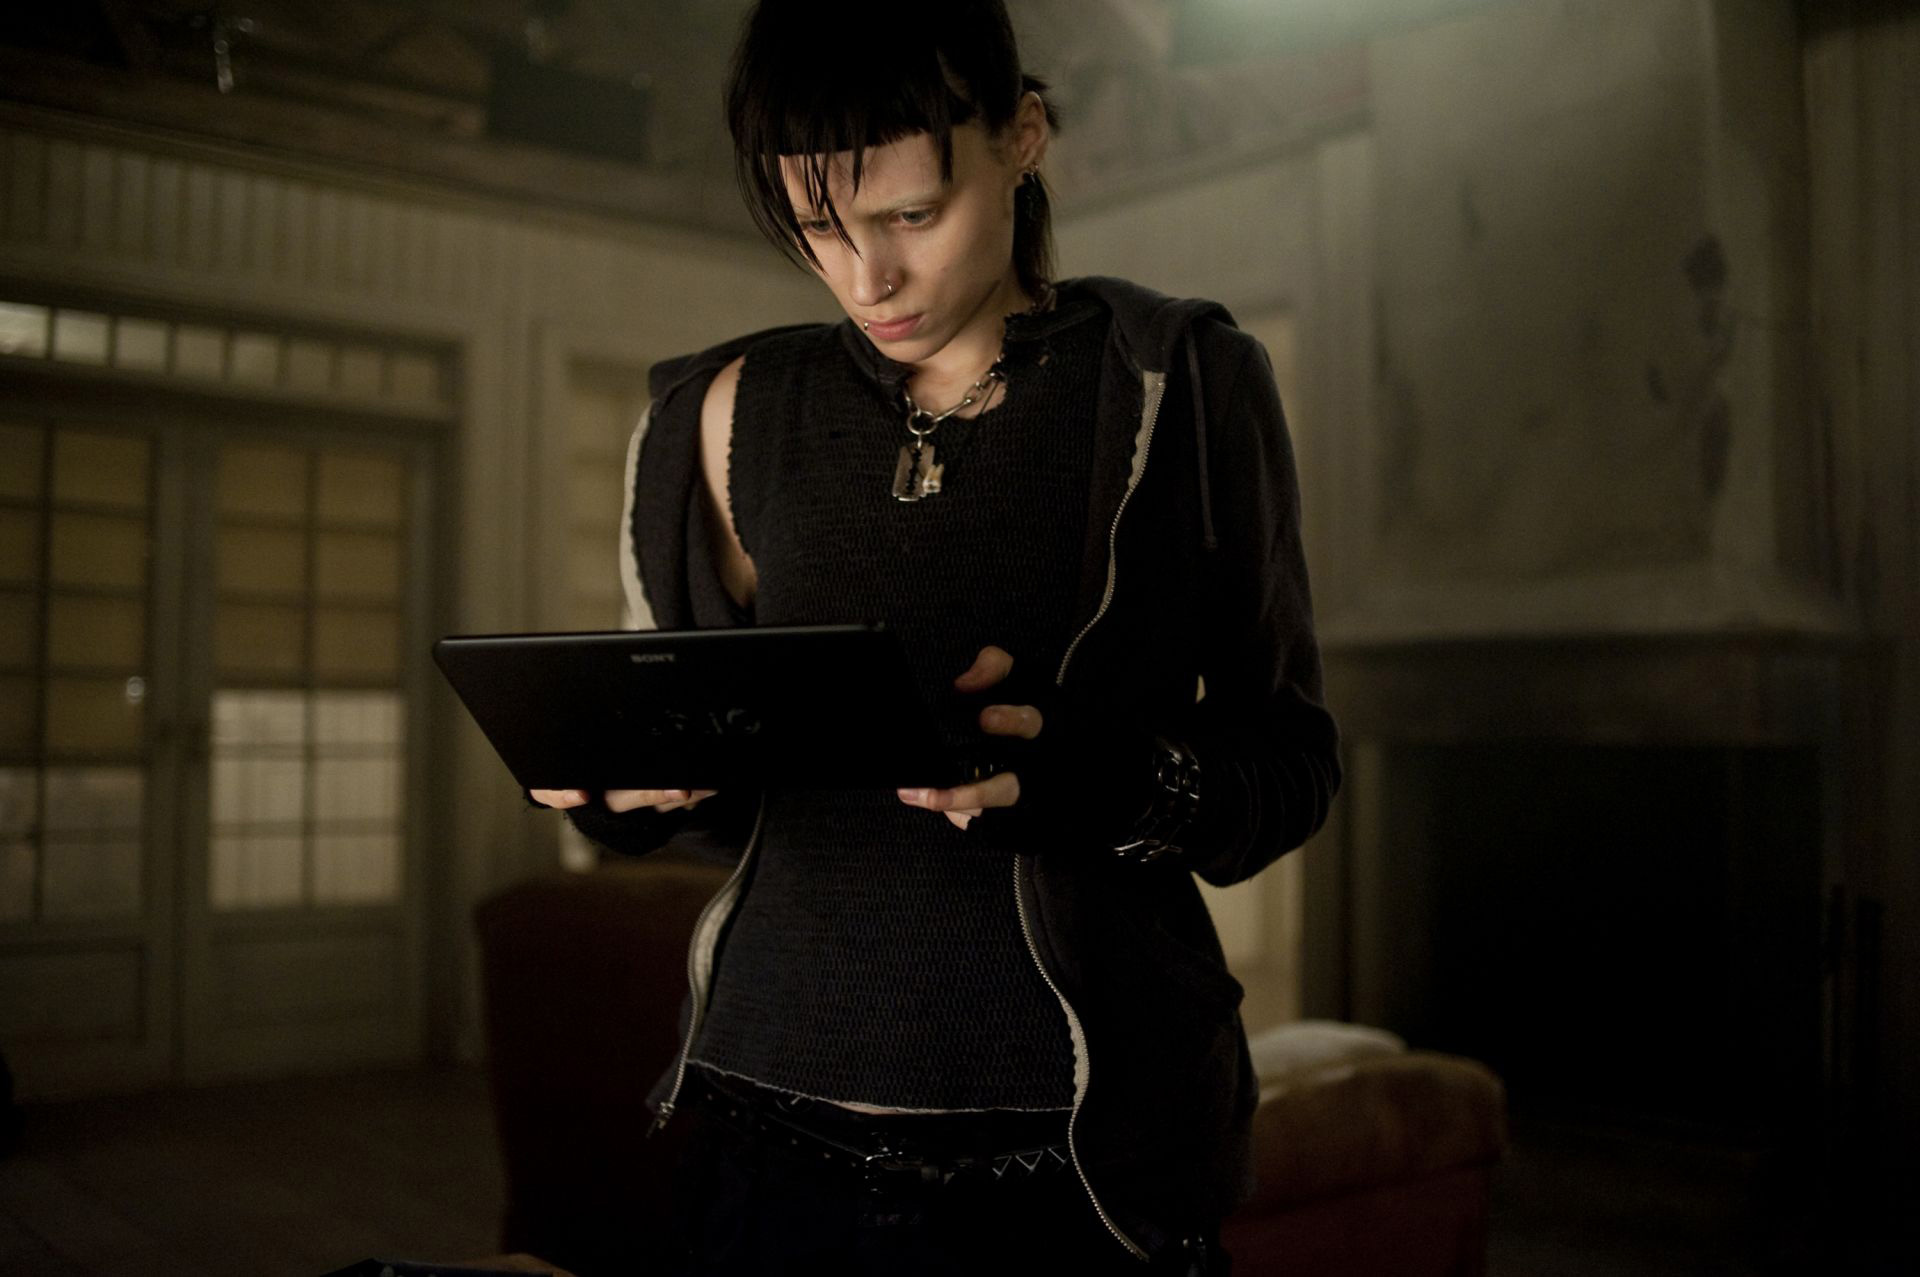 The Girl With The Dragon Tattoo #9